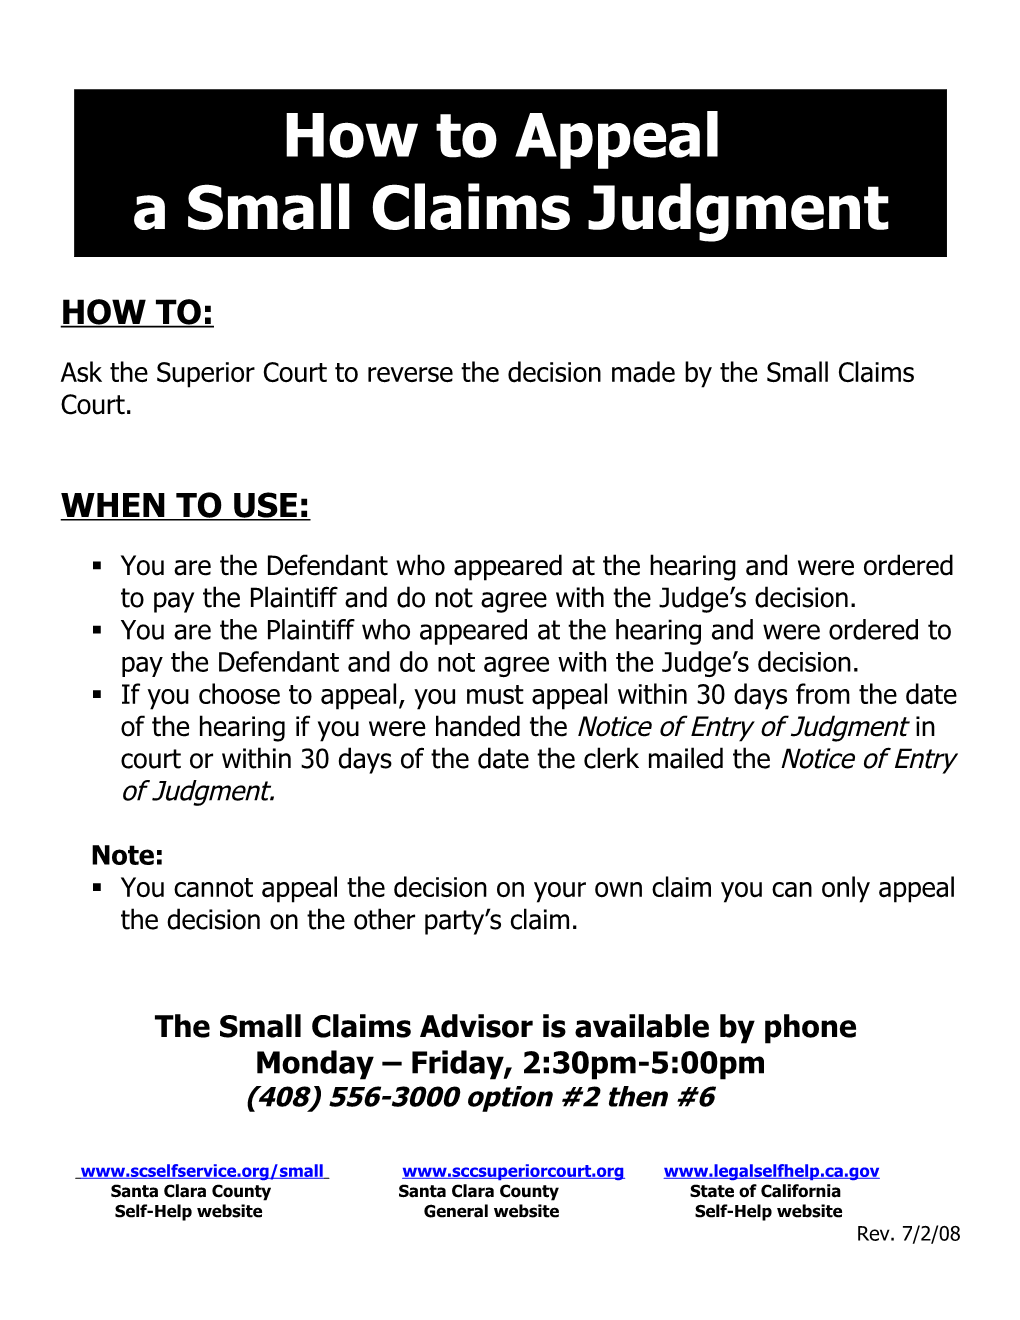 The Small Claims Advisor Is Available by Phone